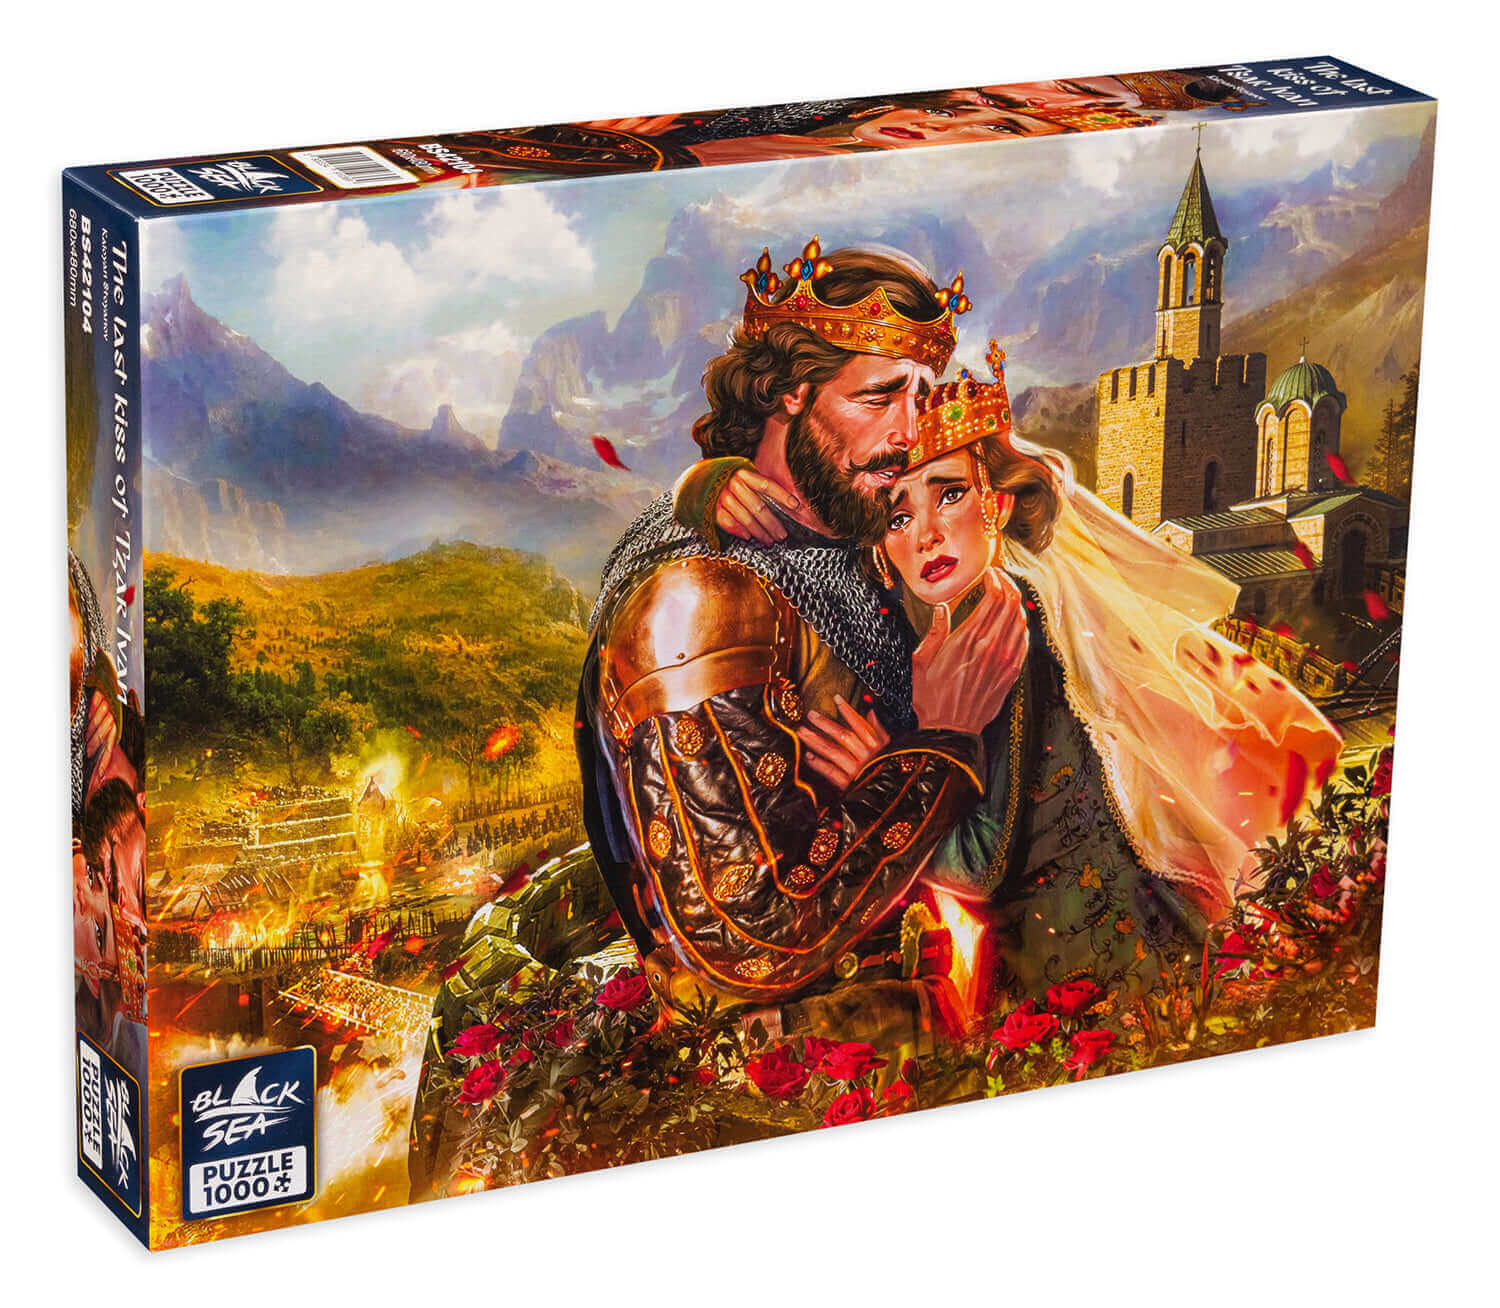 Puzzle Black Sea 1000 pieces - The last kiss of Tzar Ivan, The battle for Tarnovgrad went on for months. The siege was merciless, cruel, but the Bulgarian soldiers stood against their enemy without fear. The capital was engulfed by fierce fires, there was